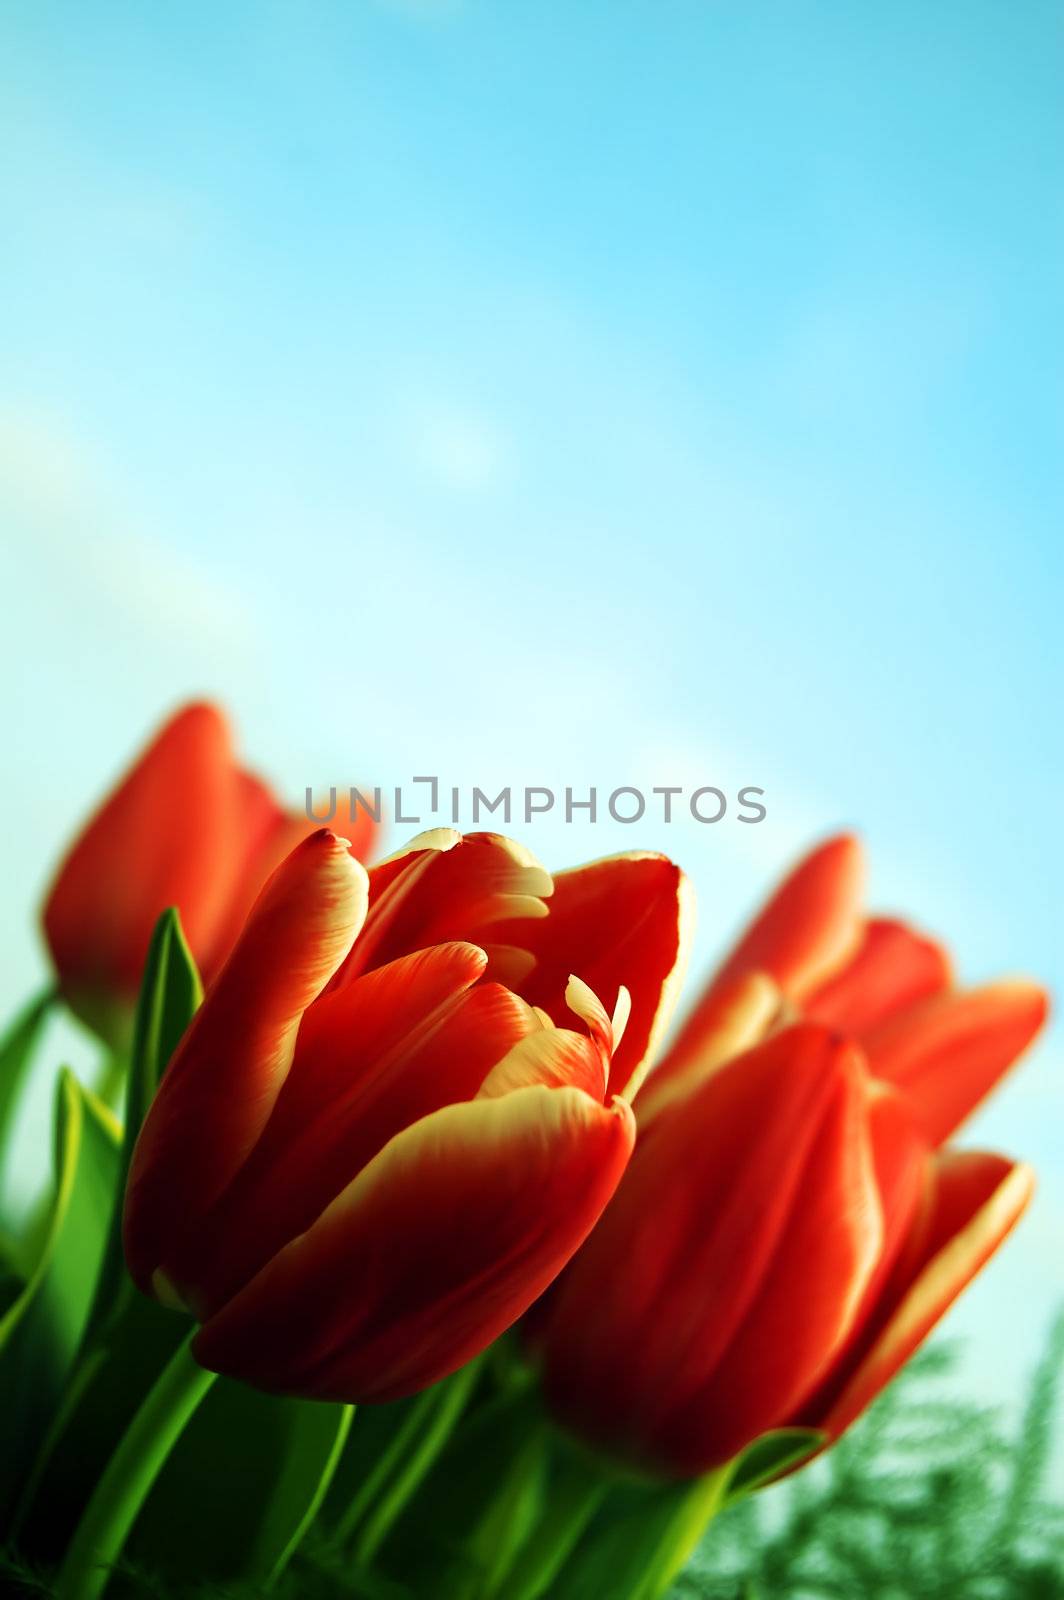 Tulips background by photocreo